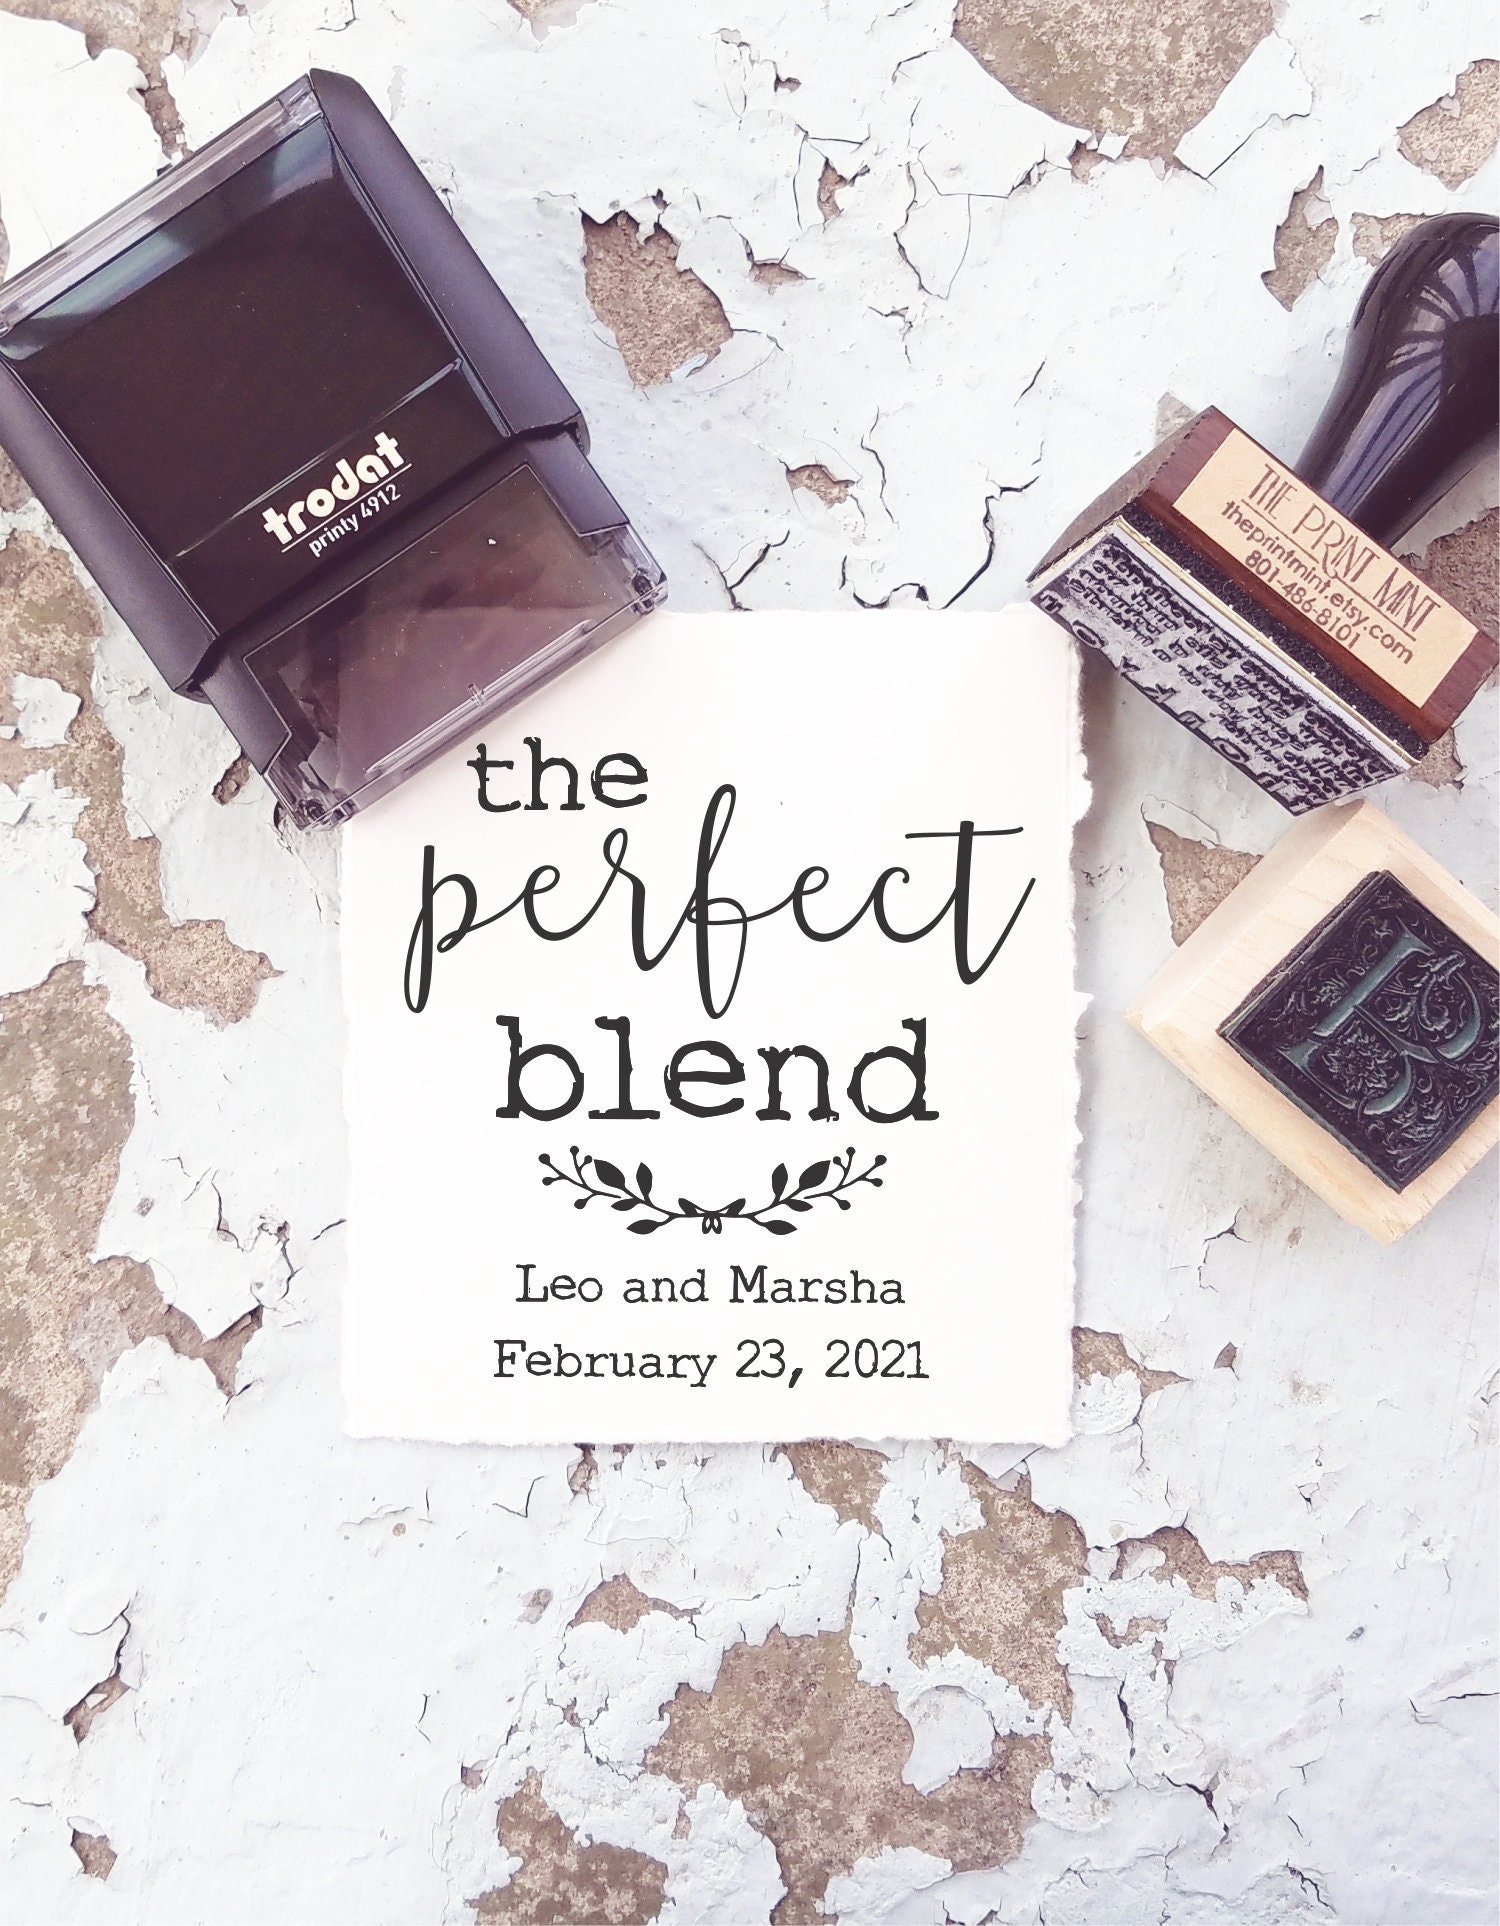 The Perfect Blend Stamp For Coffee Wedding Favors & Tags, Favor Tags Tea Bags, Invite Self Inking Stamp, 10337